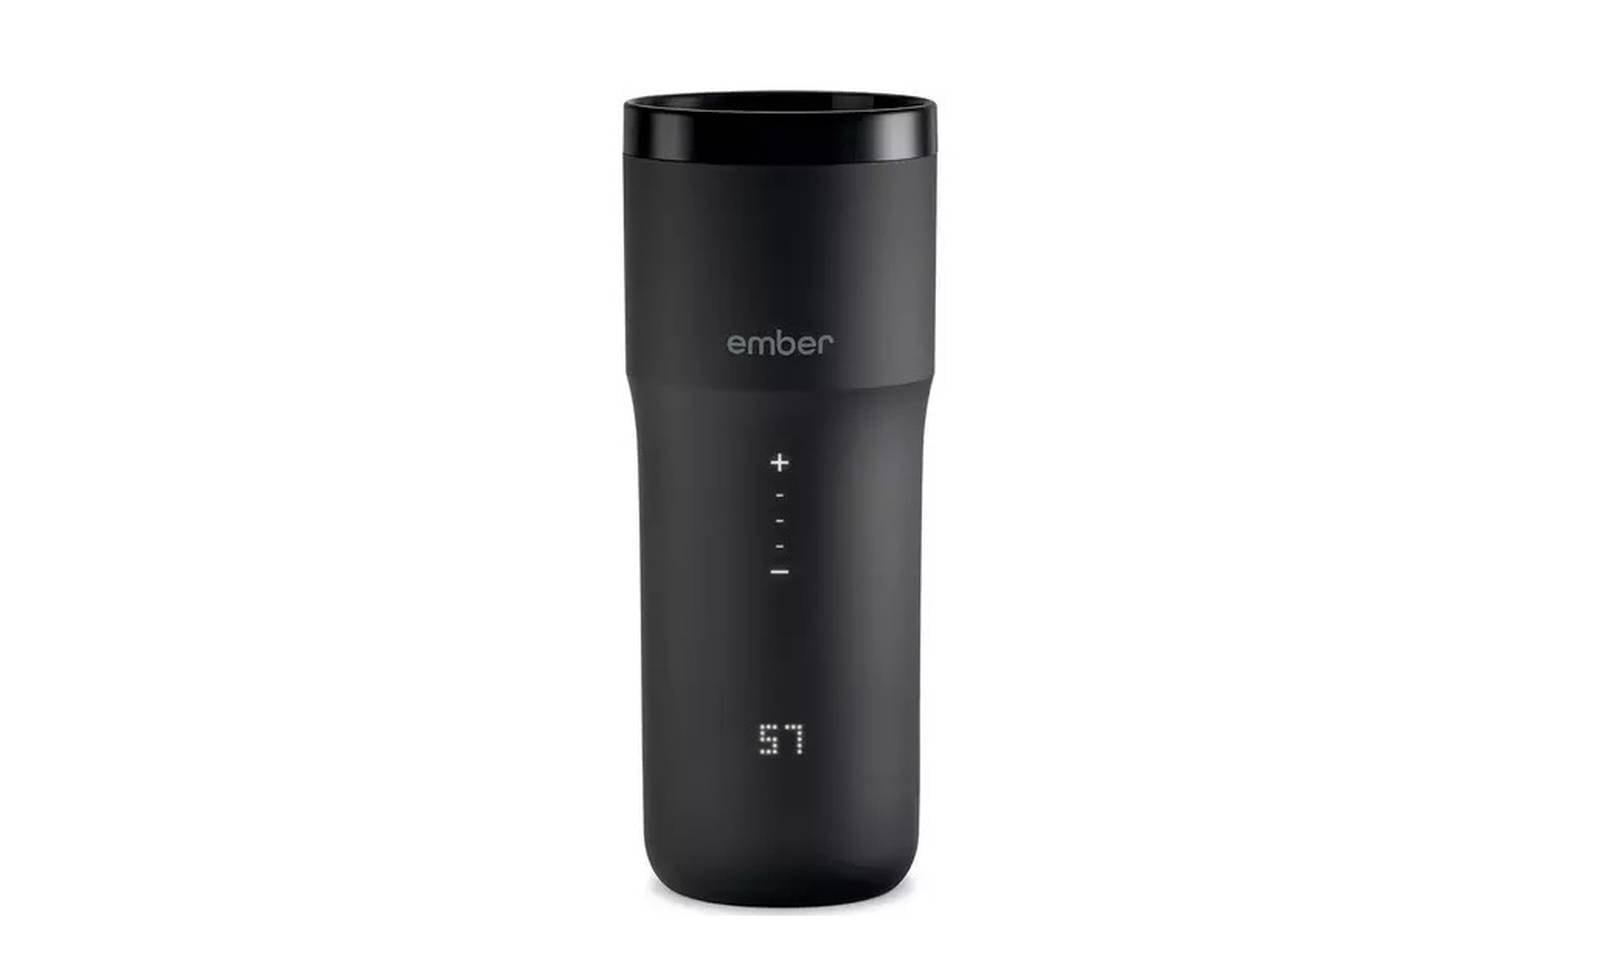 Ember Travel Mug, with digital display on the front showing the temperature